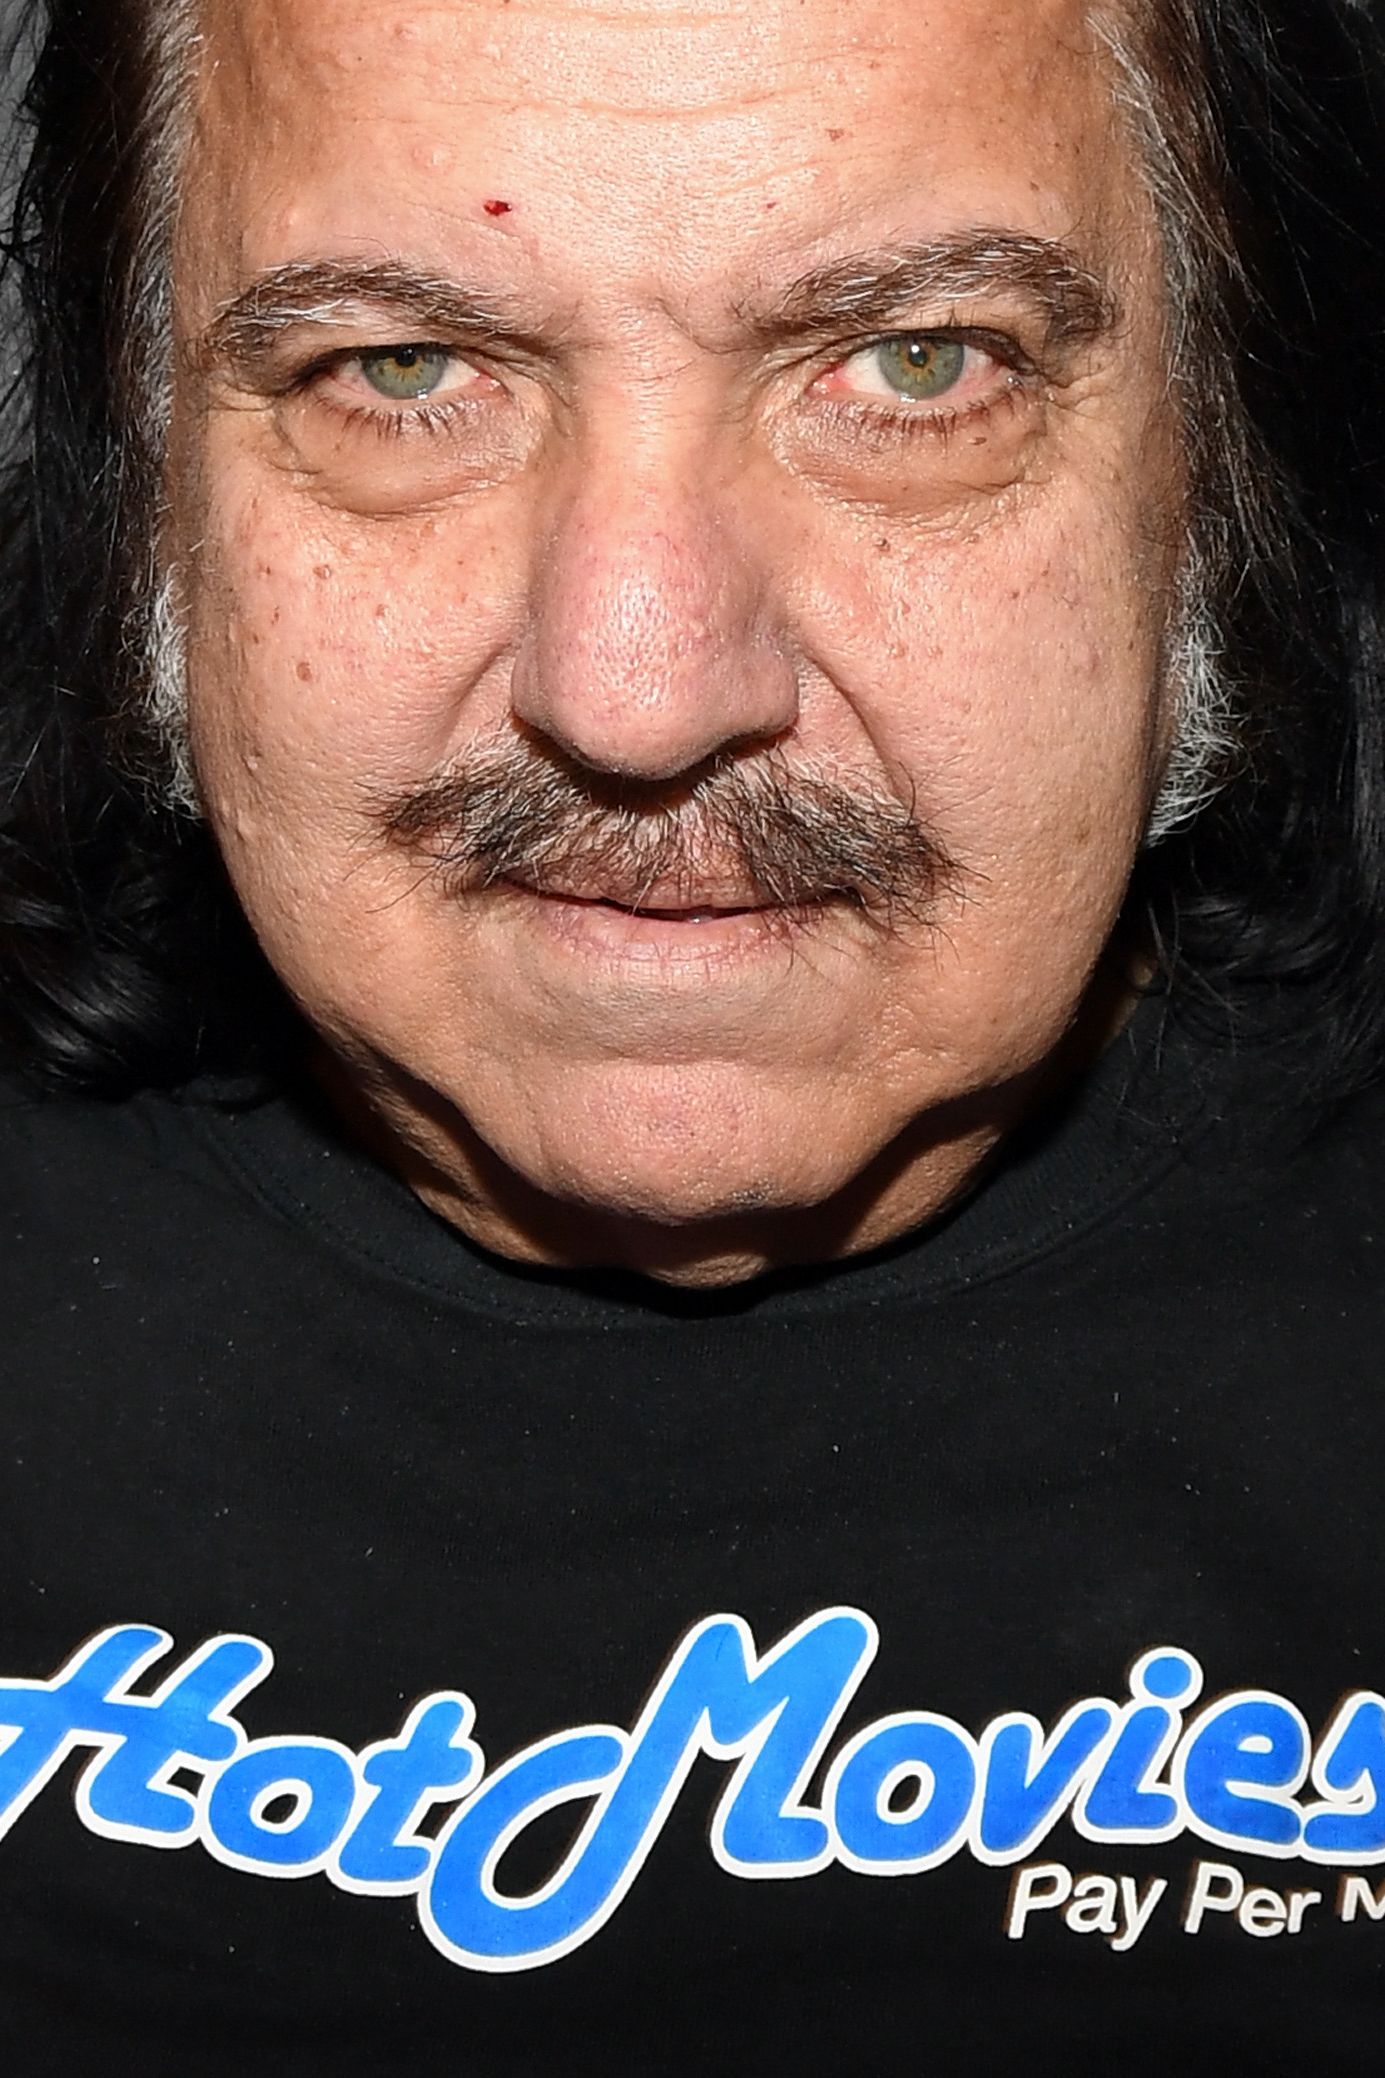 Porn star Ron Jeremy faces 20 more sexual assault charges | CNN